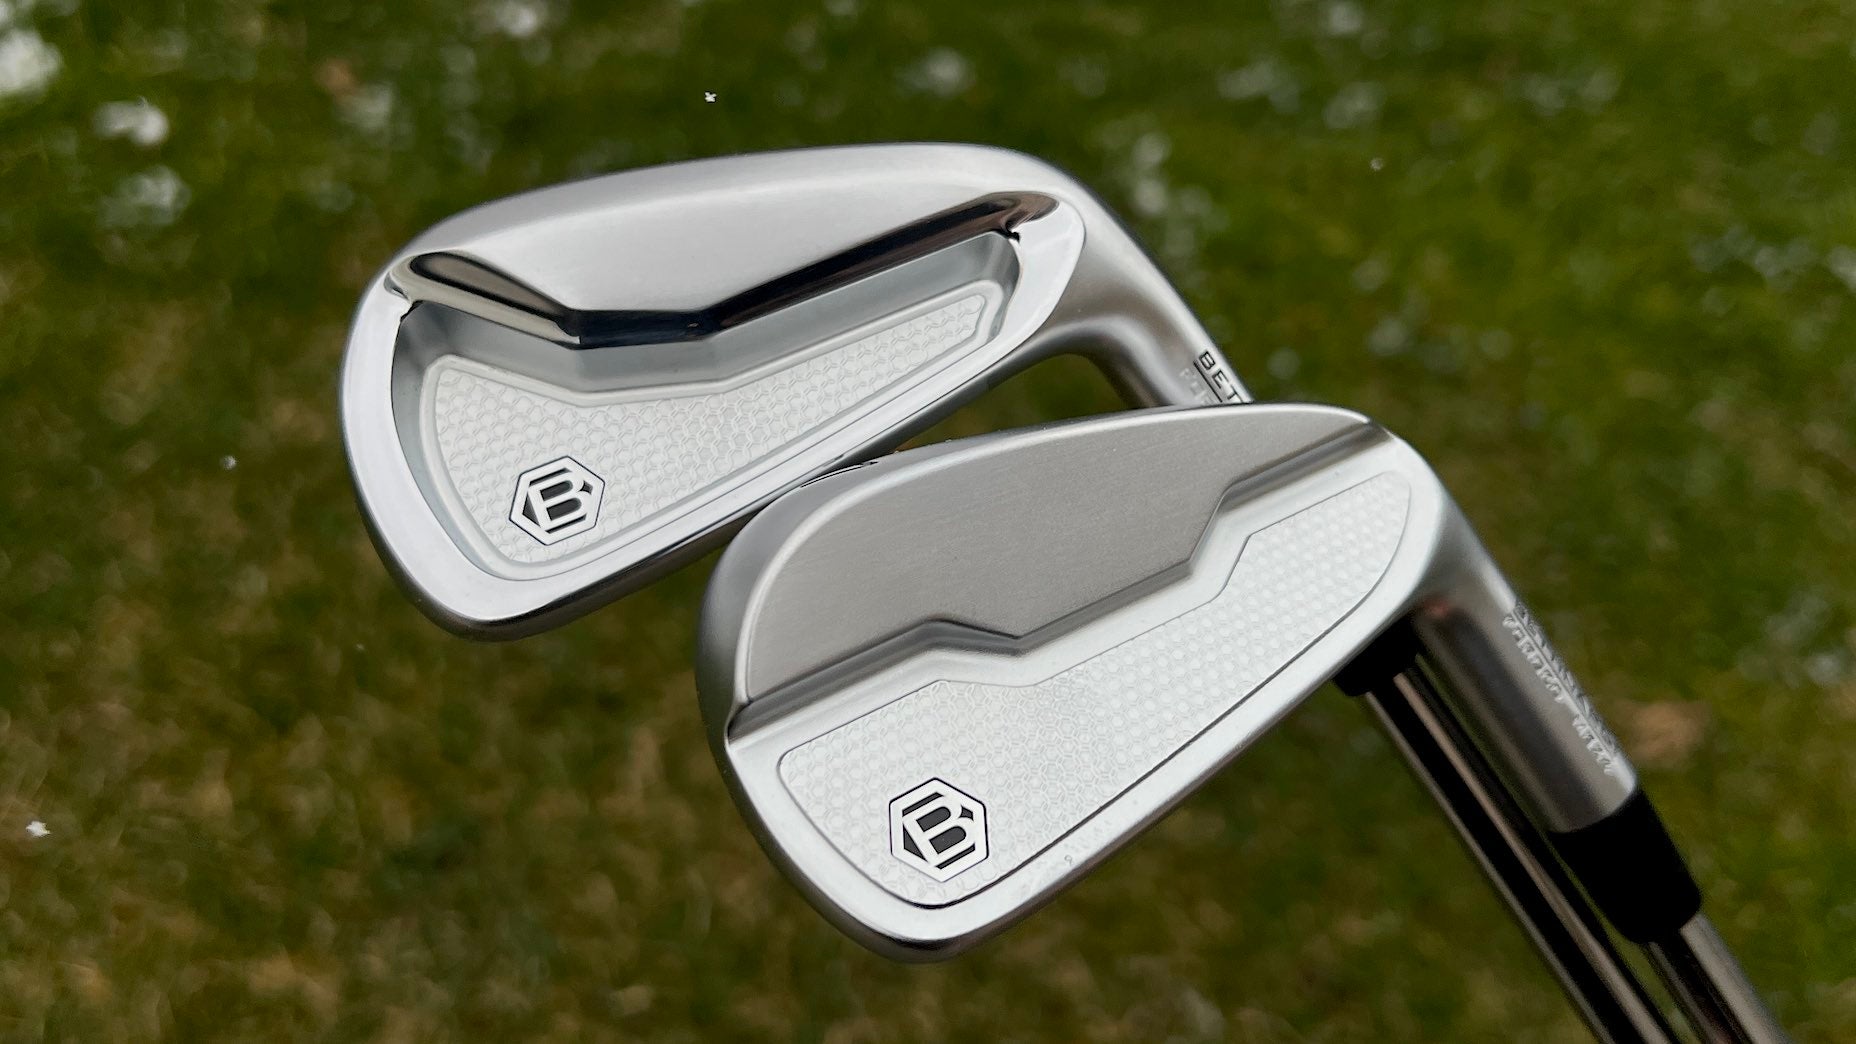 Leading Putter Brand Expands and Ventures Into Irons for the First Time